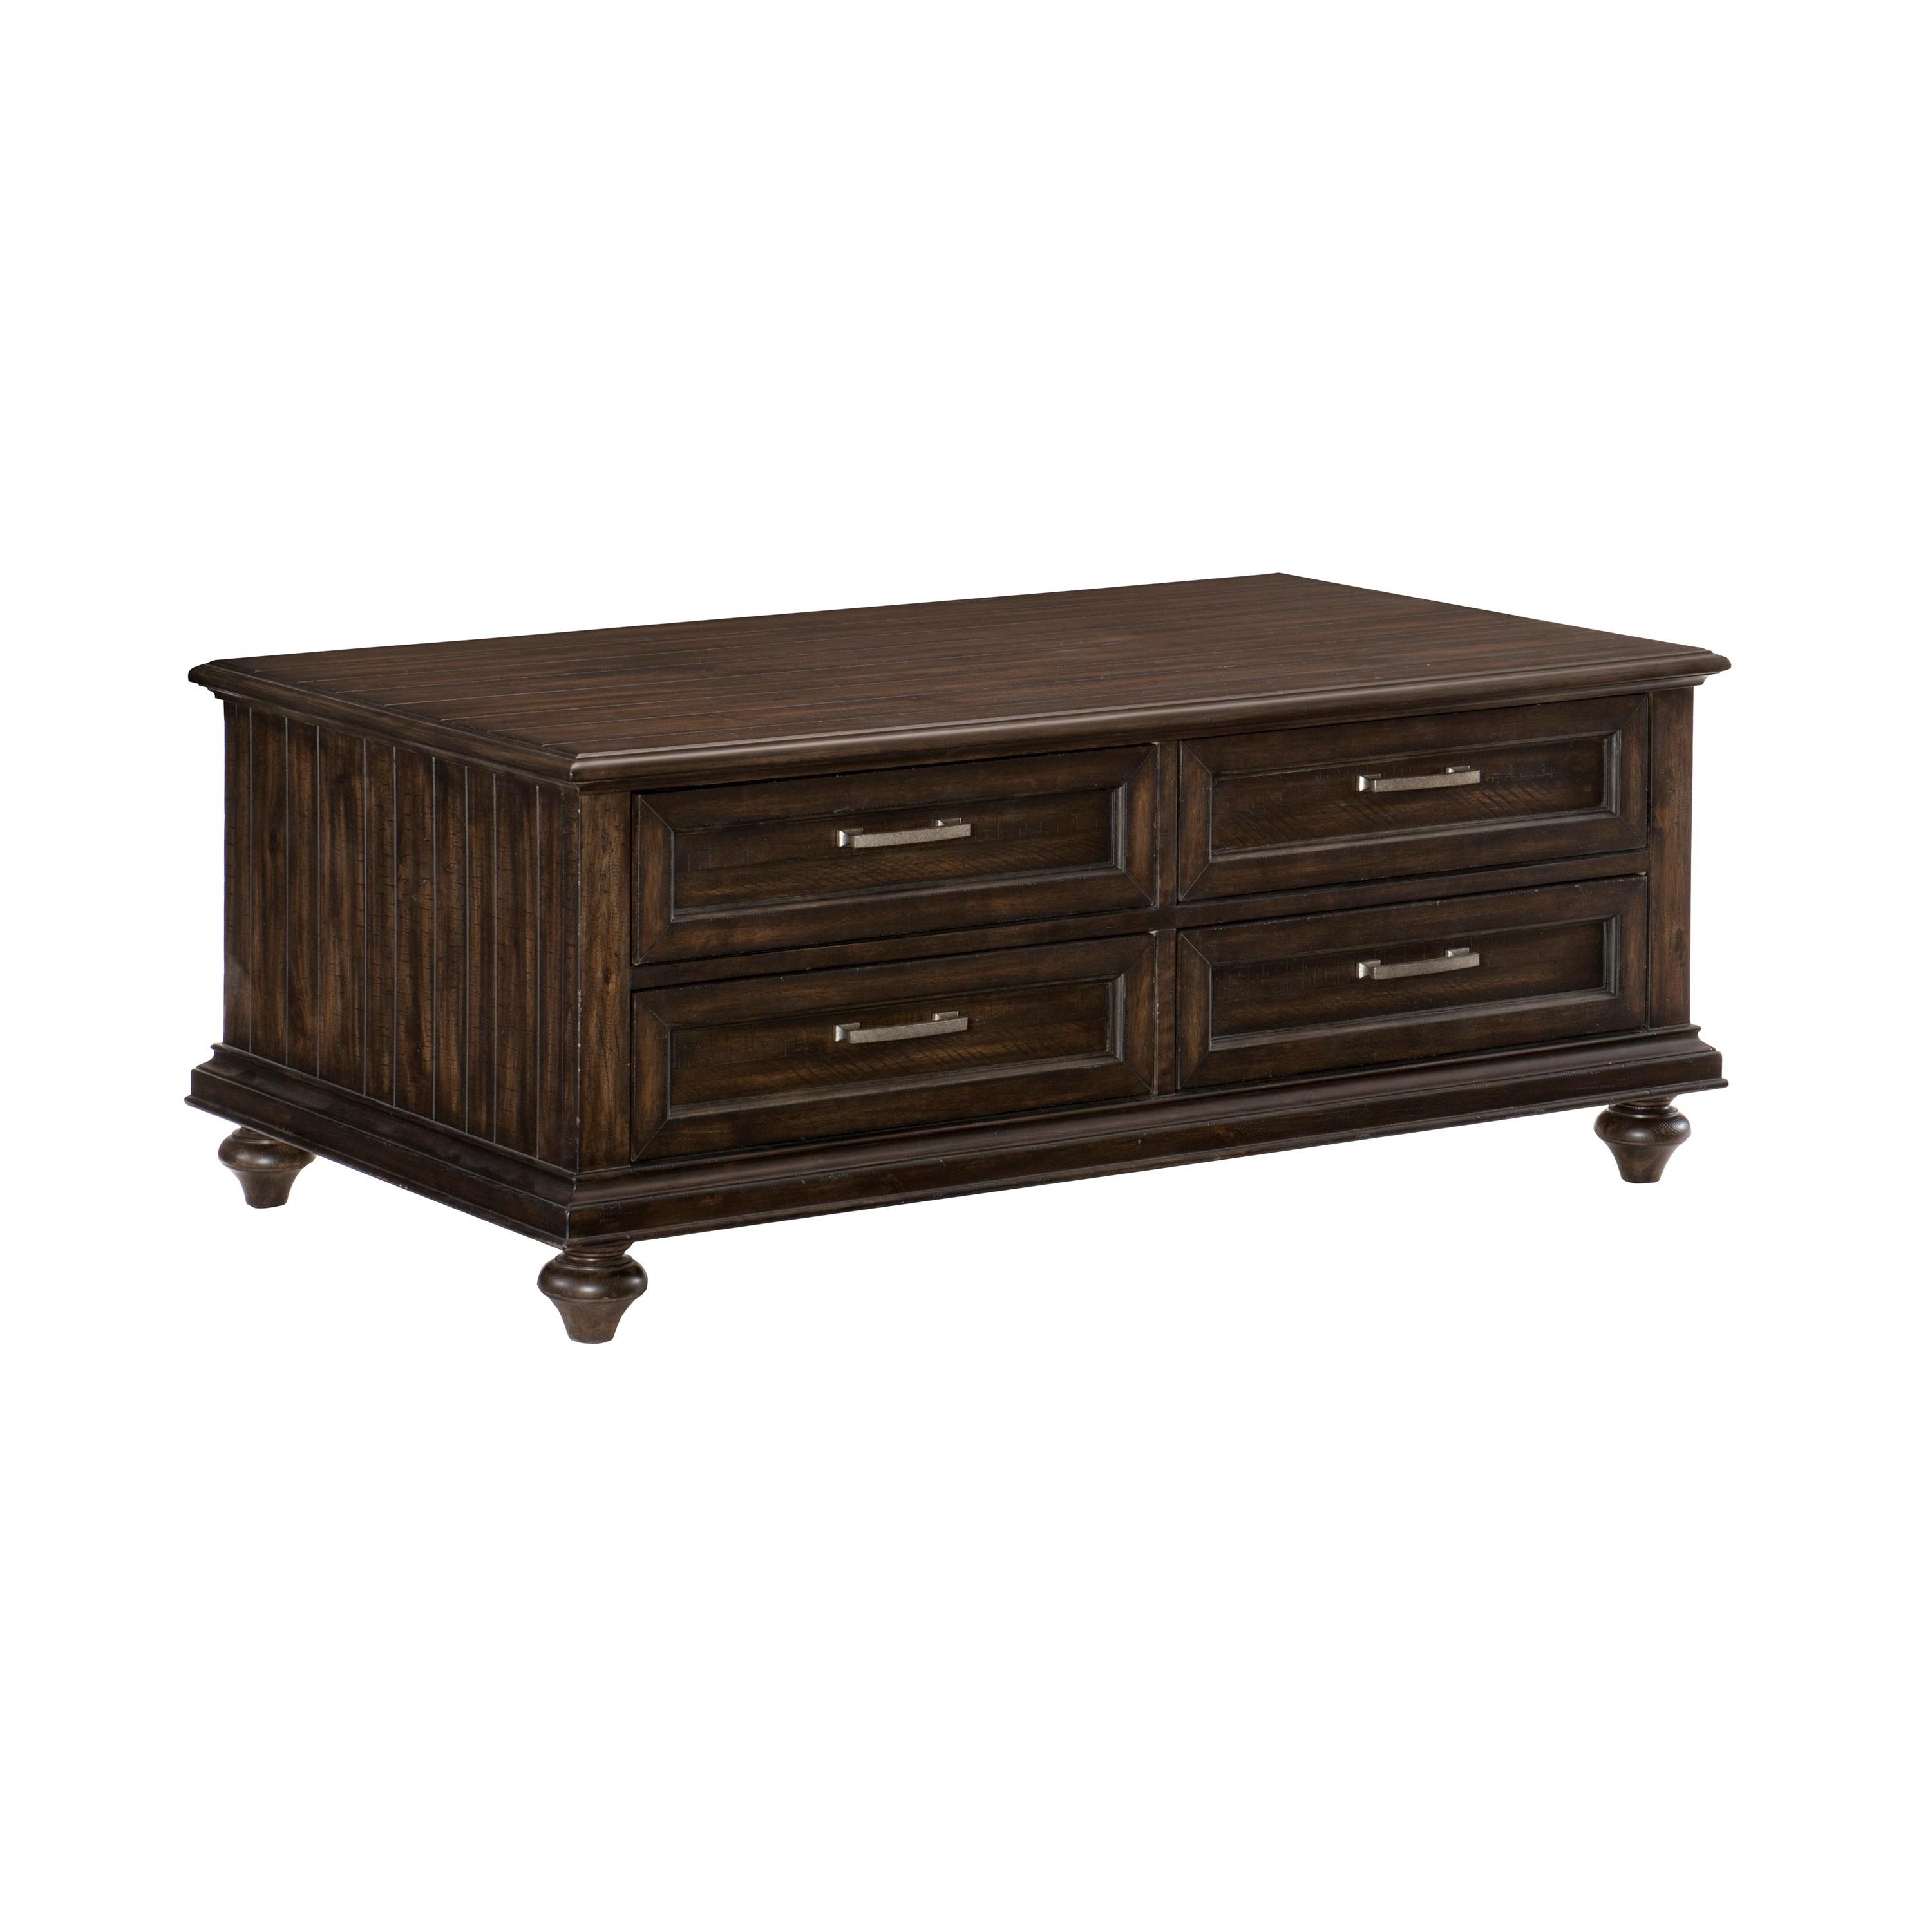 

    
Transitional Driftwood Charcoal Wood Cocktail Table Homelegance 1689-30 Cardano
